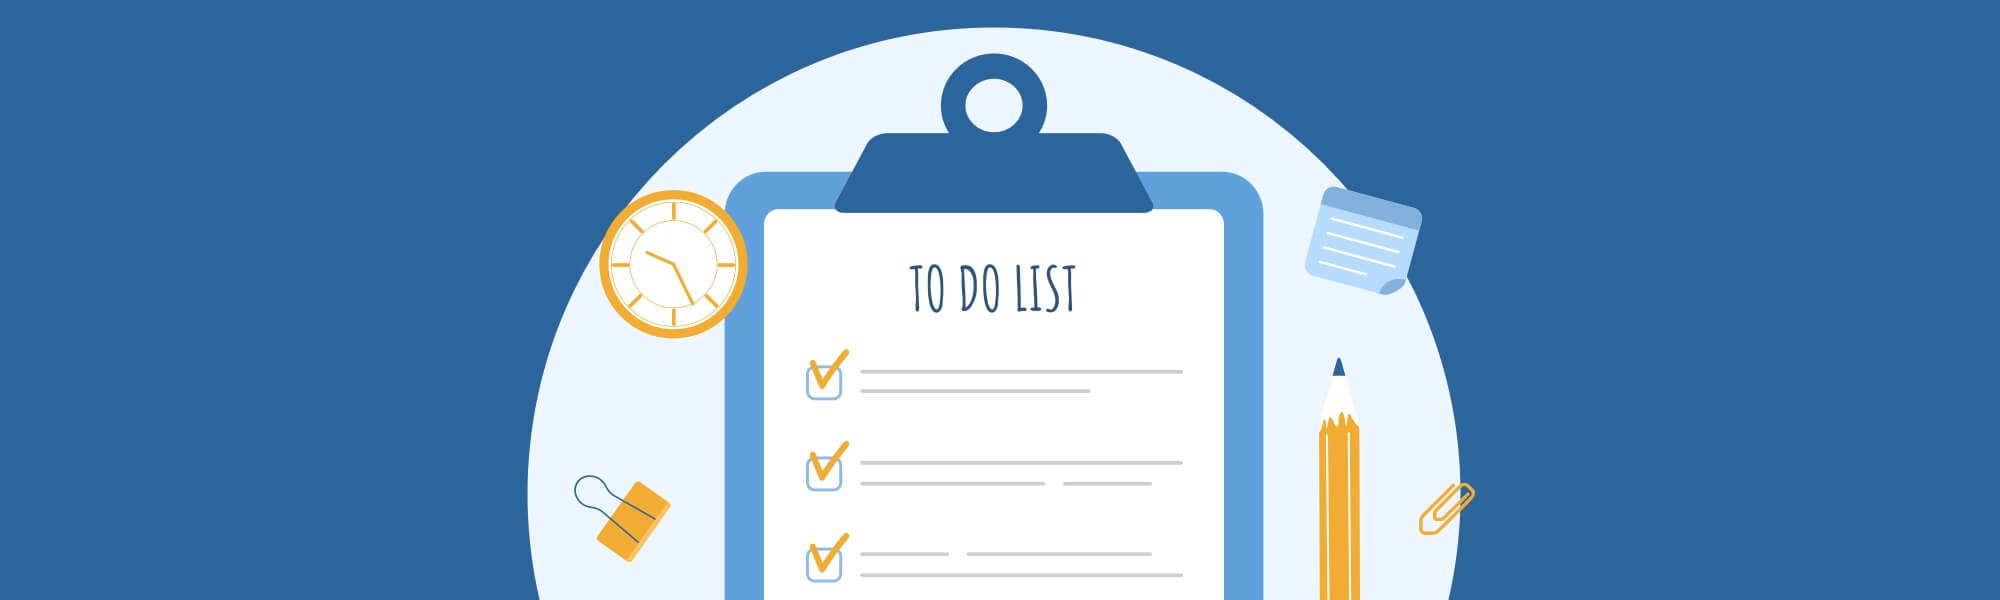 Mastering to do lists